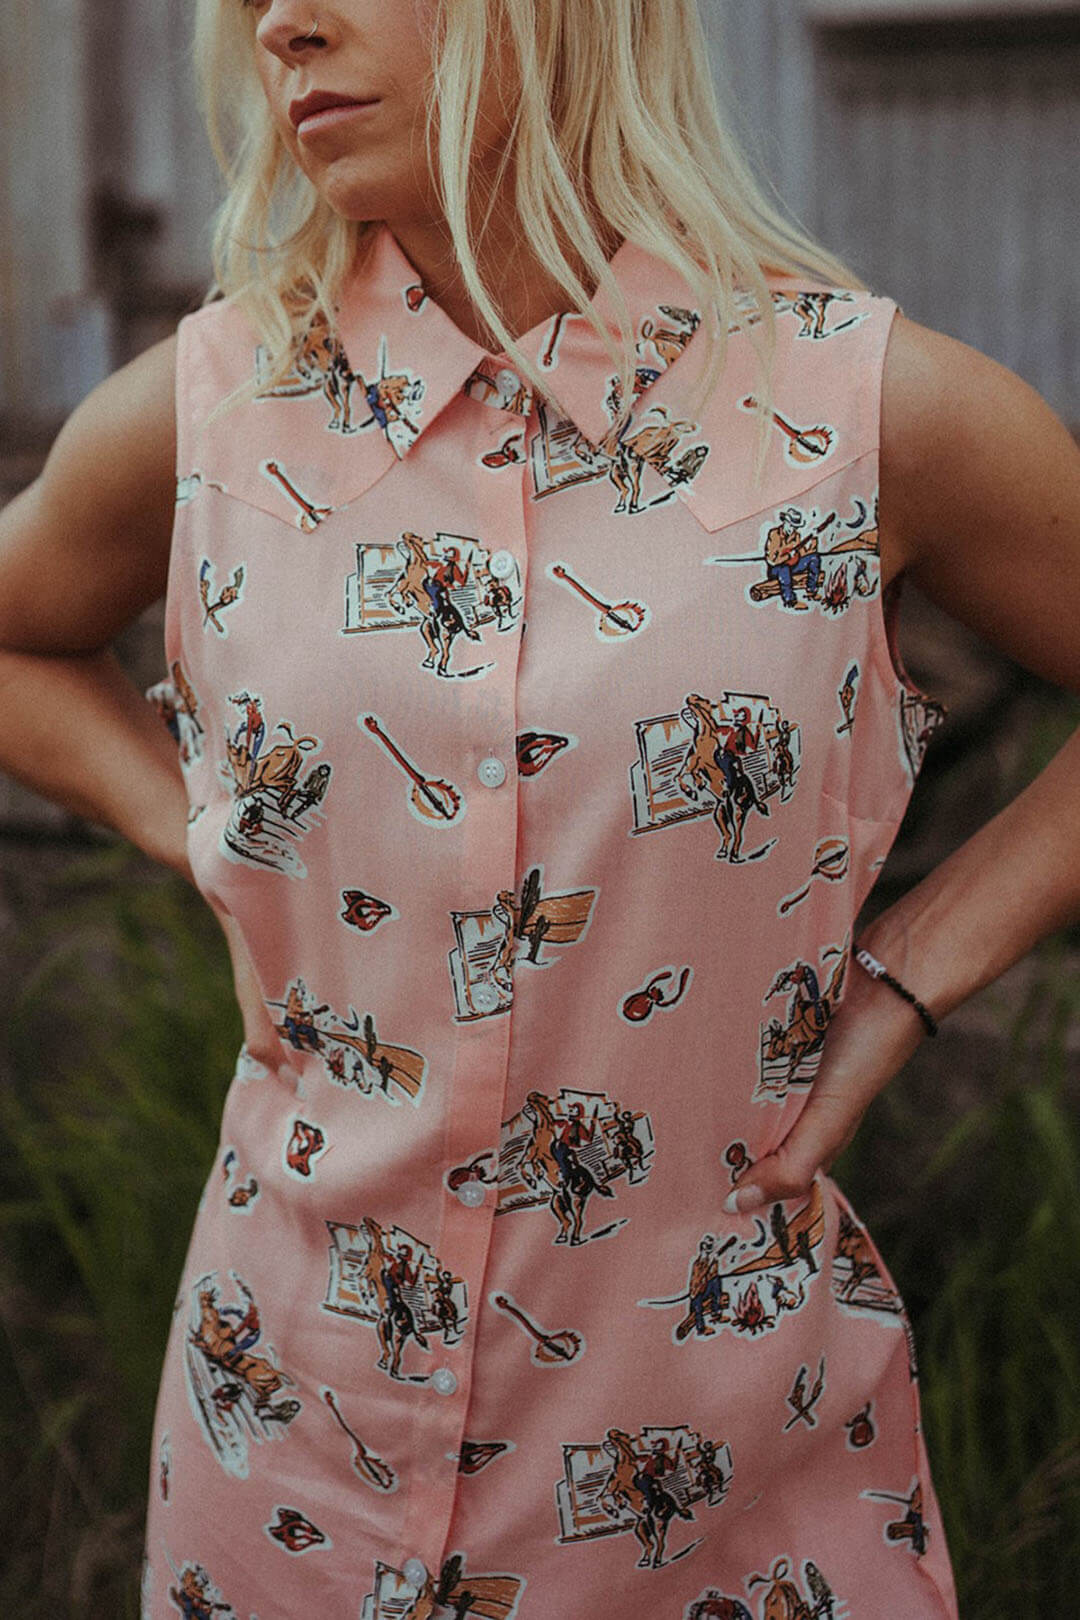 Close up image of the Sleeveless Cowboy Print Duster/ Dress by Rock & Roll Denim.  Pink in color with western scene graphics.